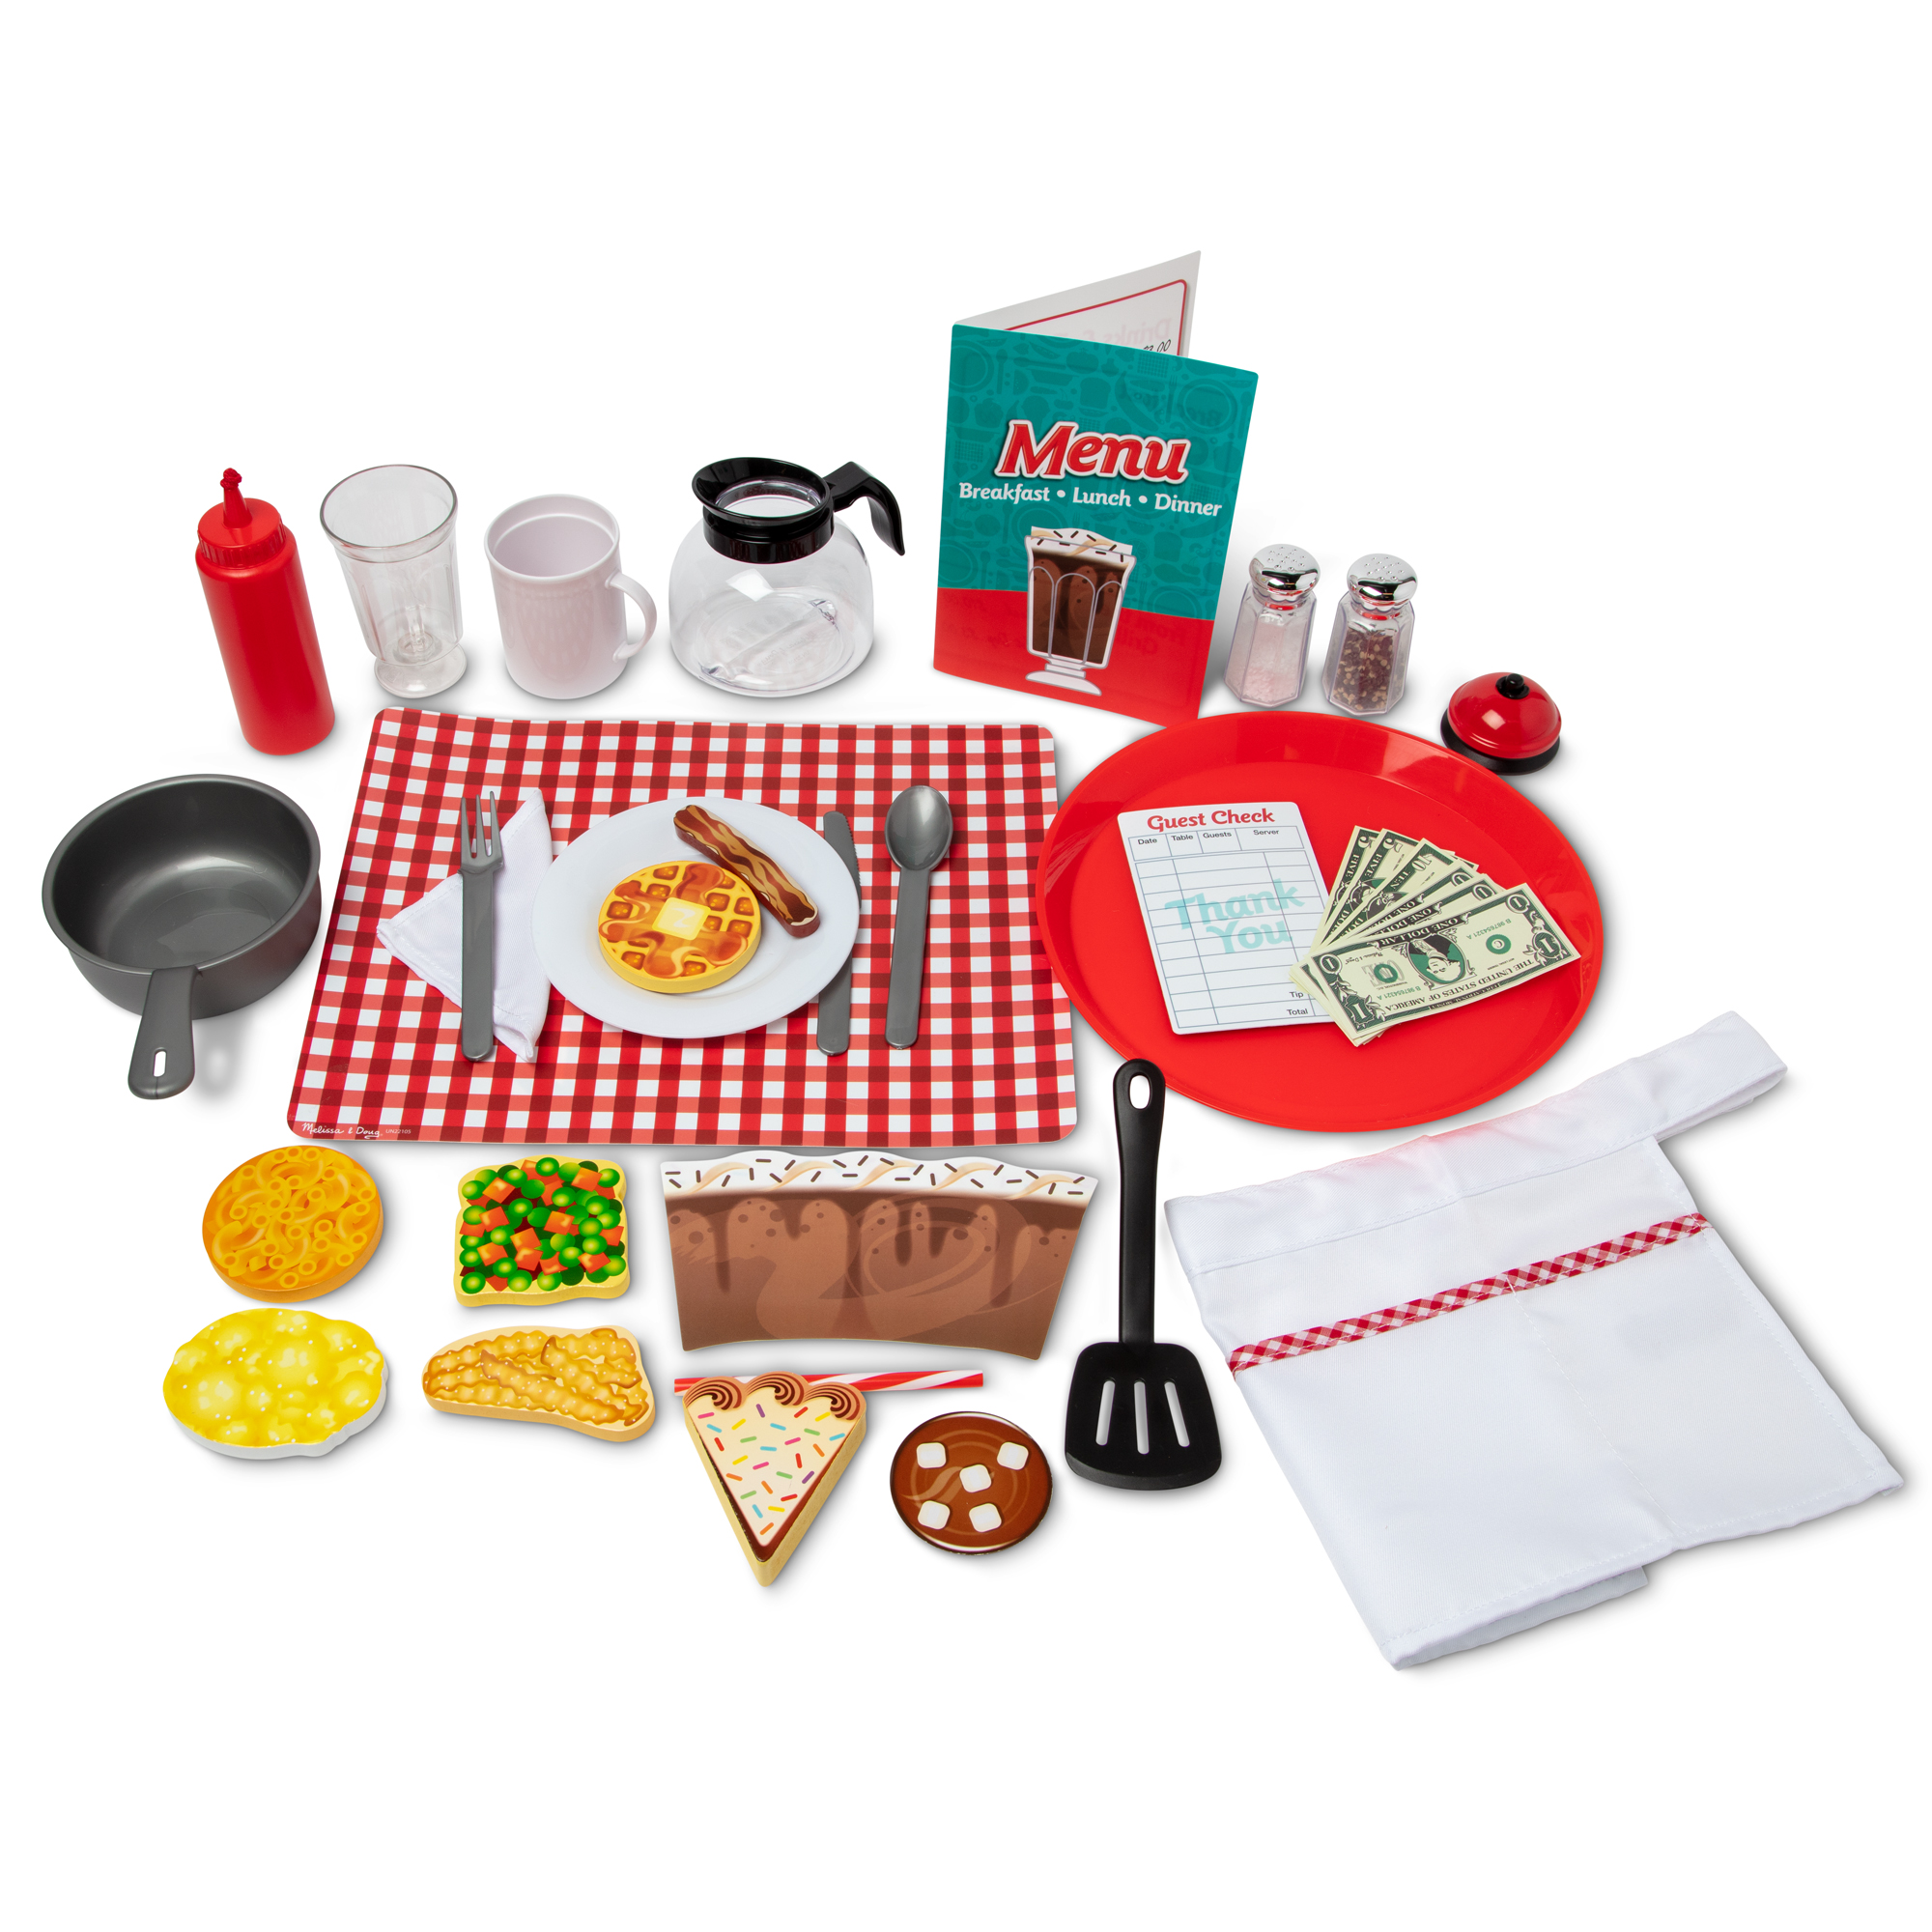 Melissa & Doug Deluxe Restaurant Cooking and Play Food Set – 43 Pieces - image 1 of 9